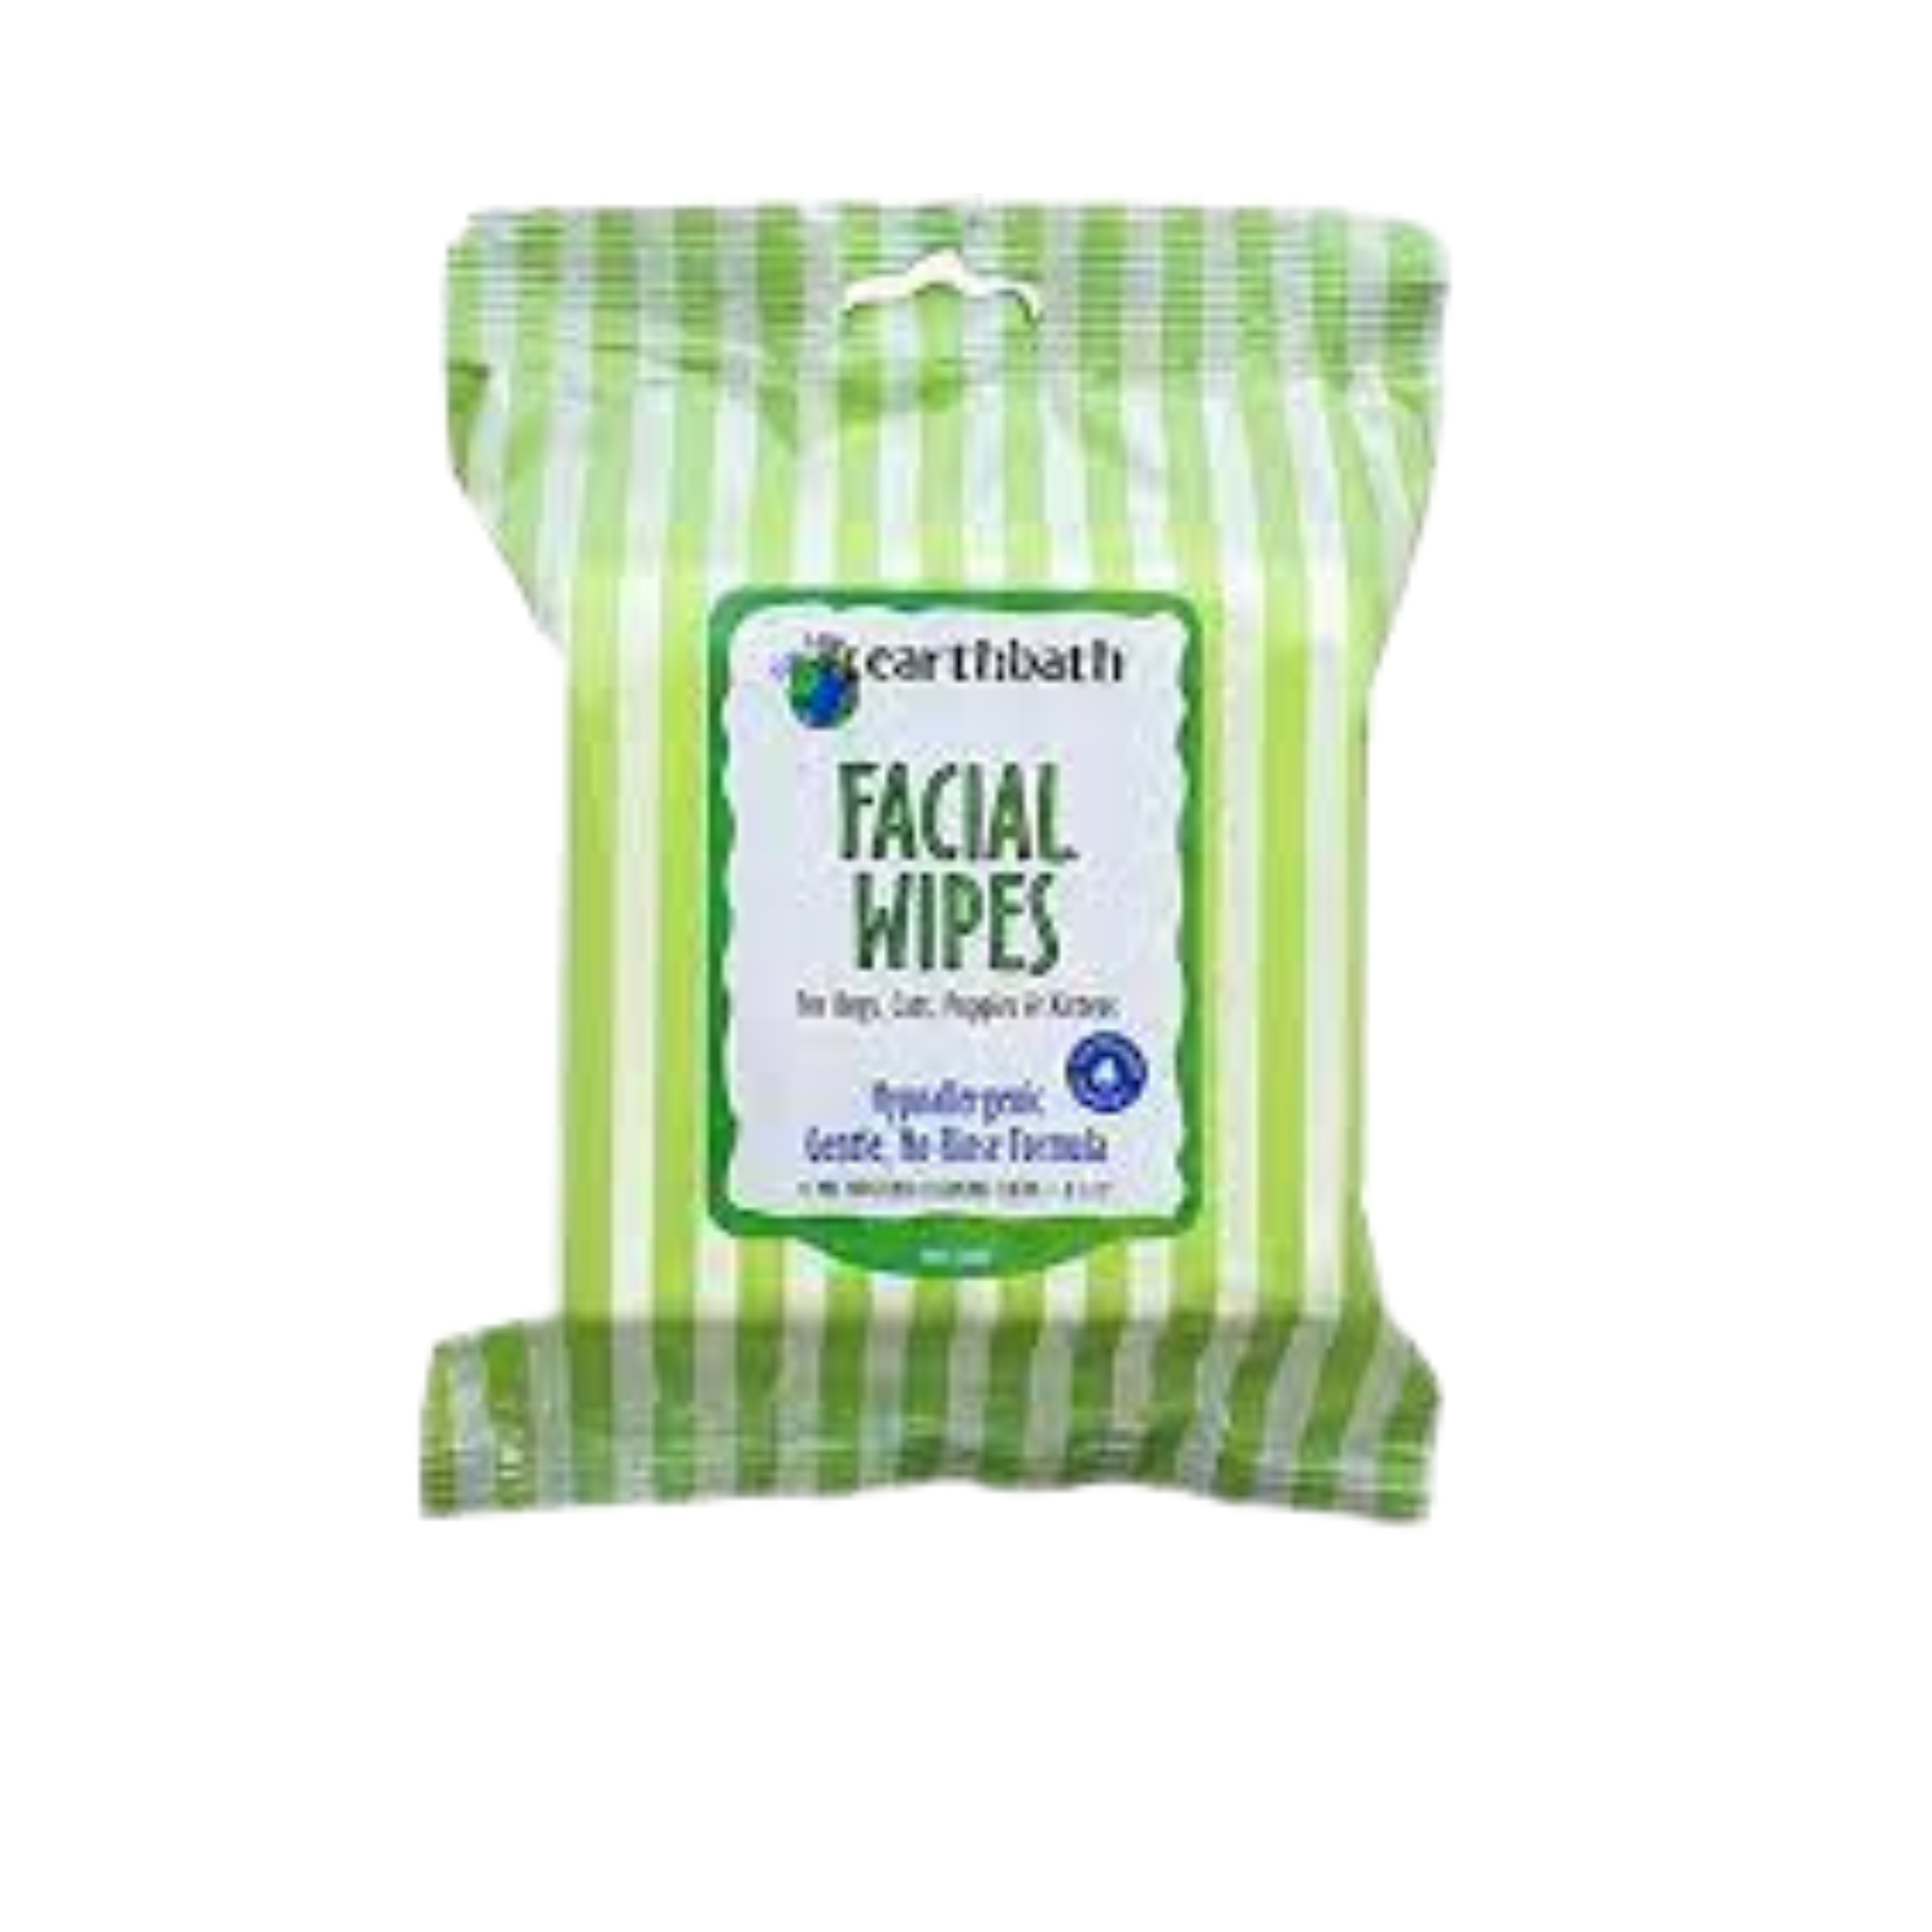 Earthbath Facial Wipes For Dogs, Cats, Puppies & Kittens 25 Ct.